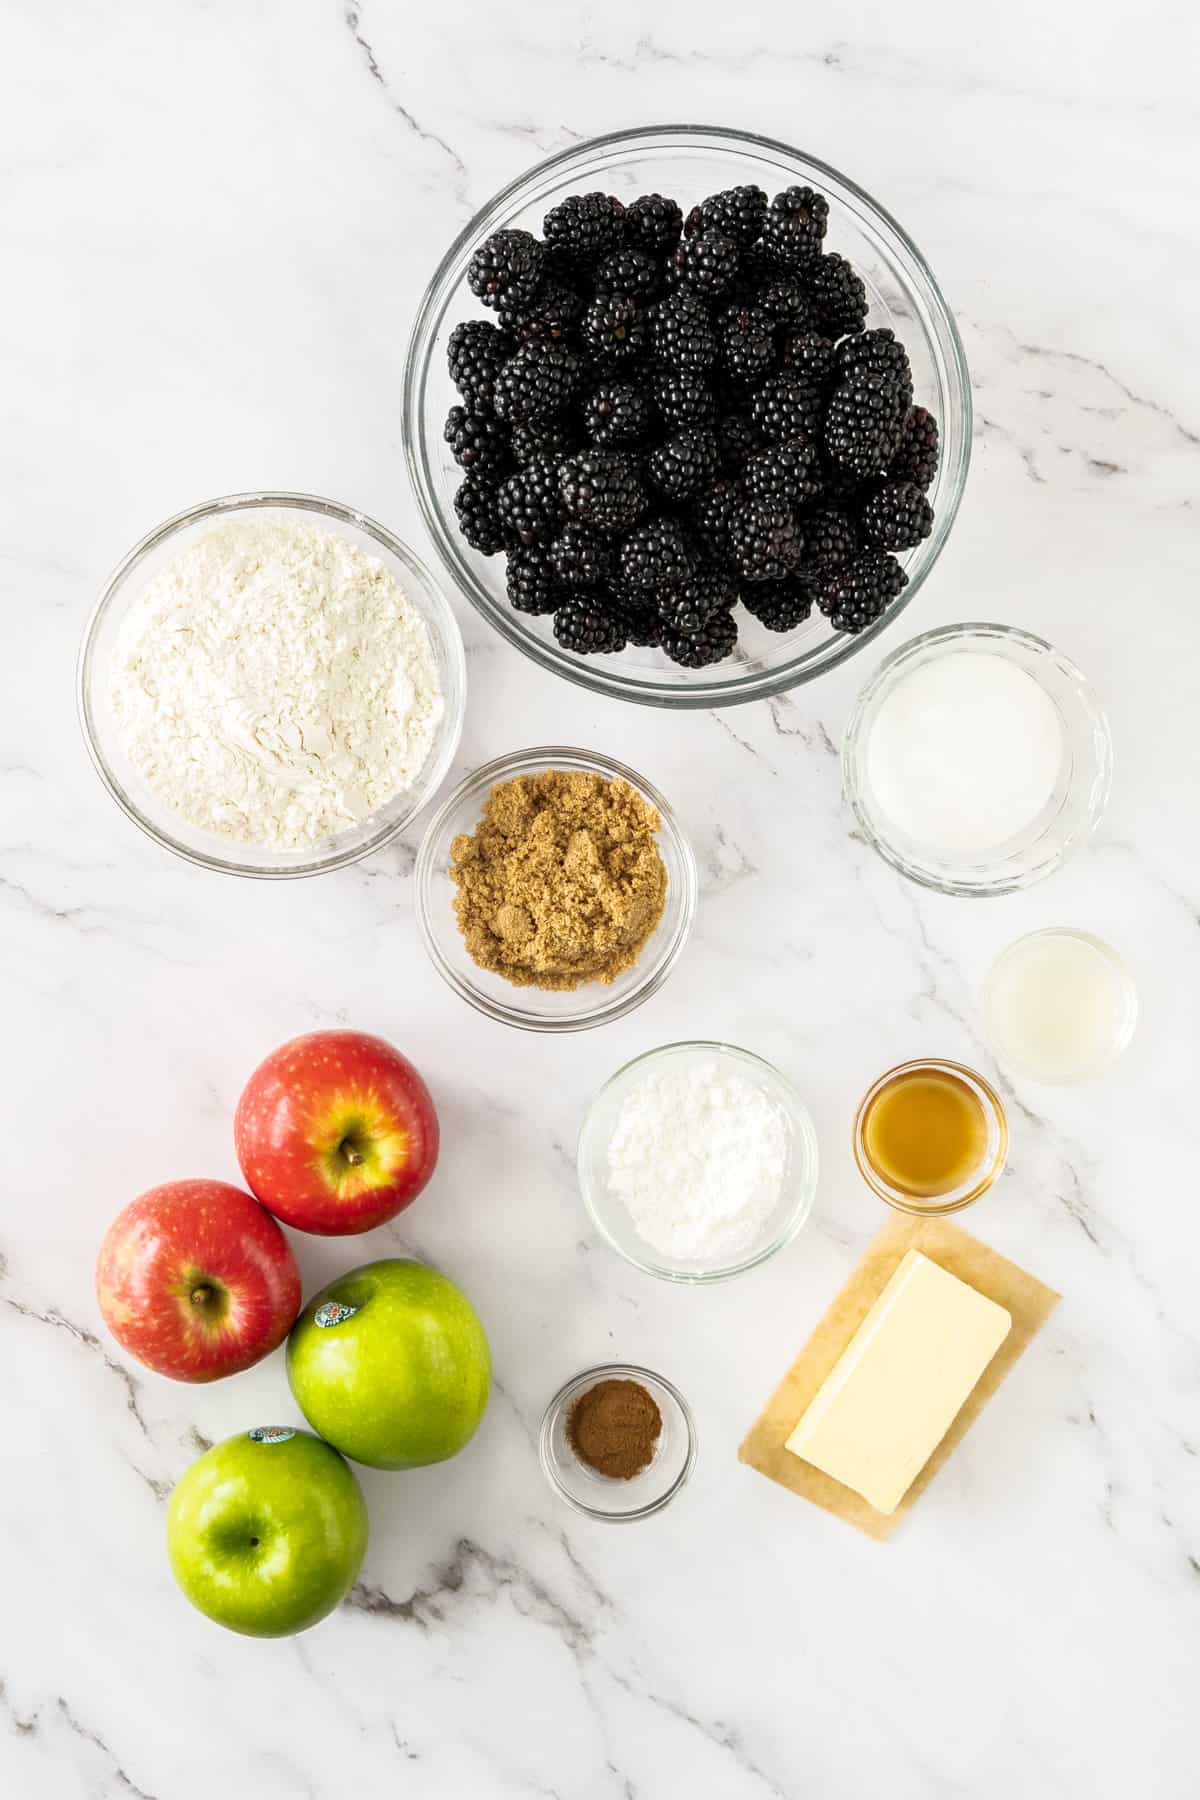 a bowl of blackberries, flour, brown sugar, butter, and apples on a marble board.